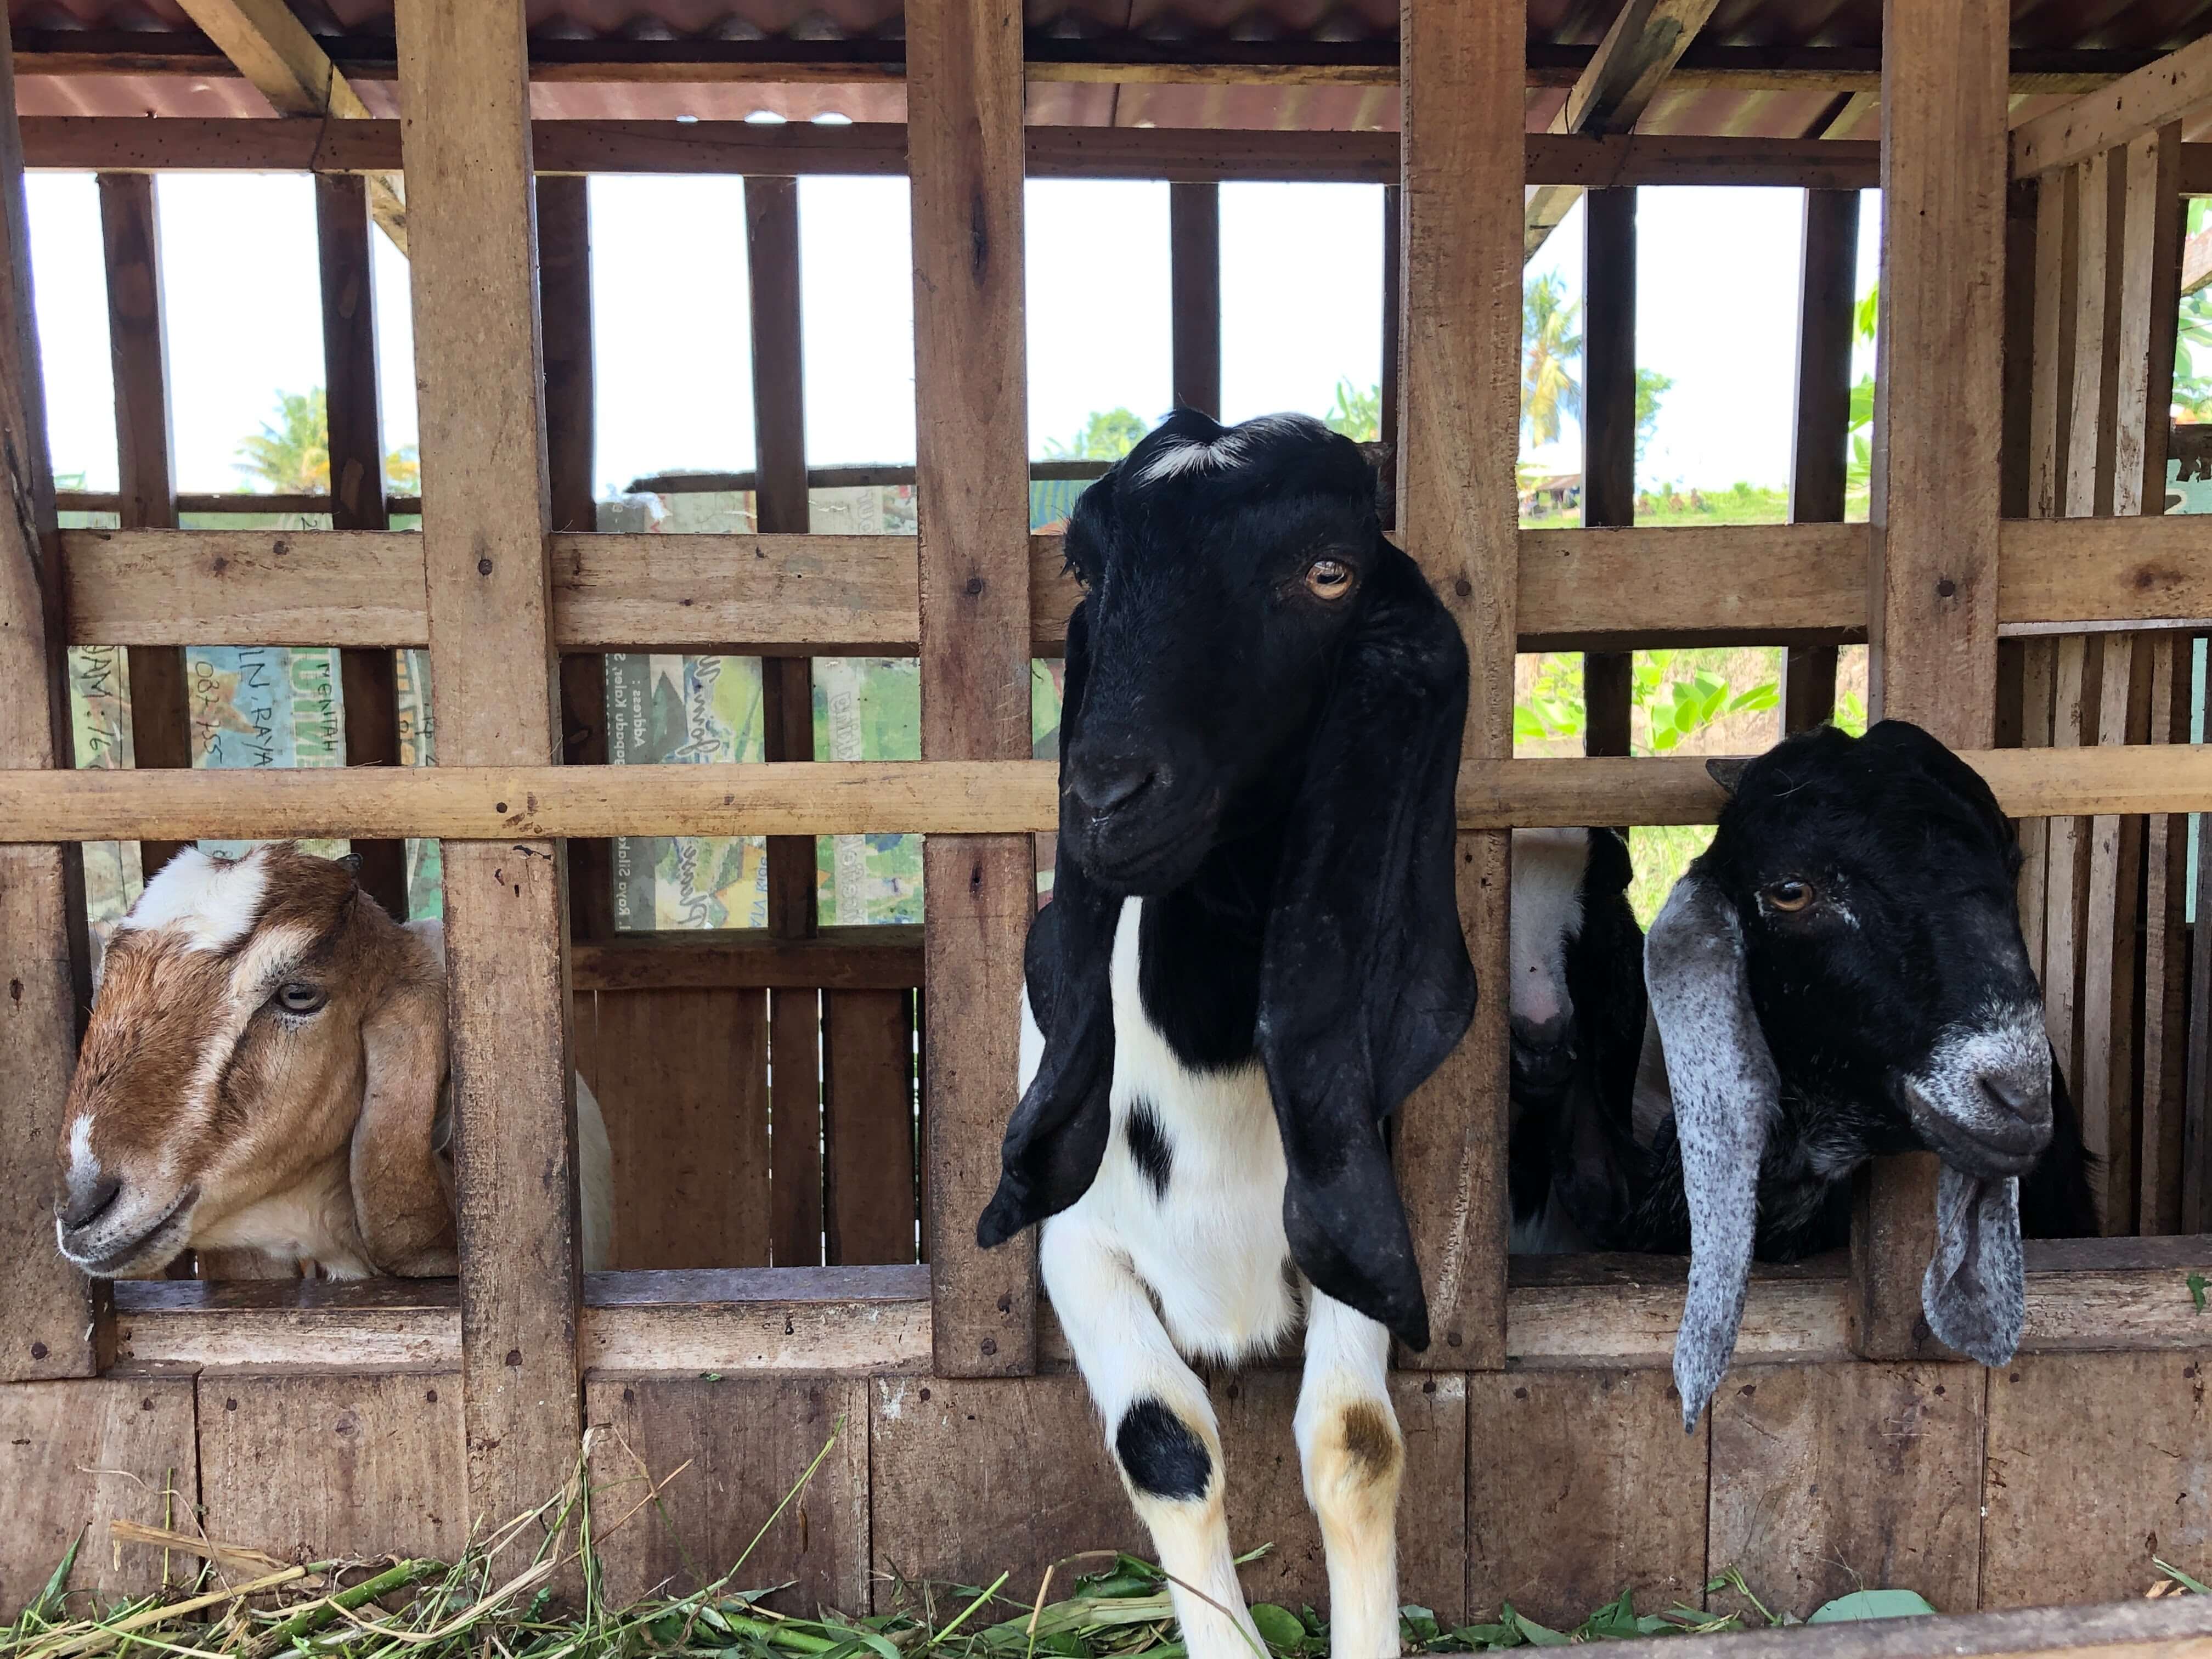 Giving goats to selected families to rear for extra income is one another way Feed Bali hopes to develop sustainable livelihoods for Balinese communities. Photo courtesy of Tresna Bali Cooking School 